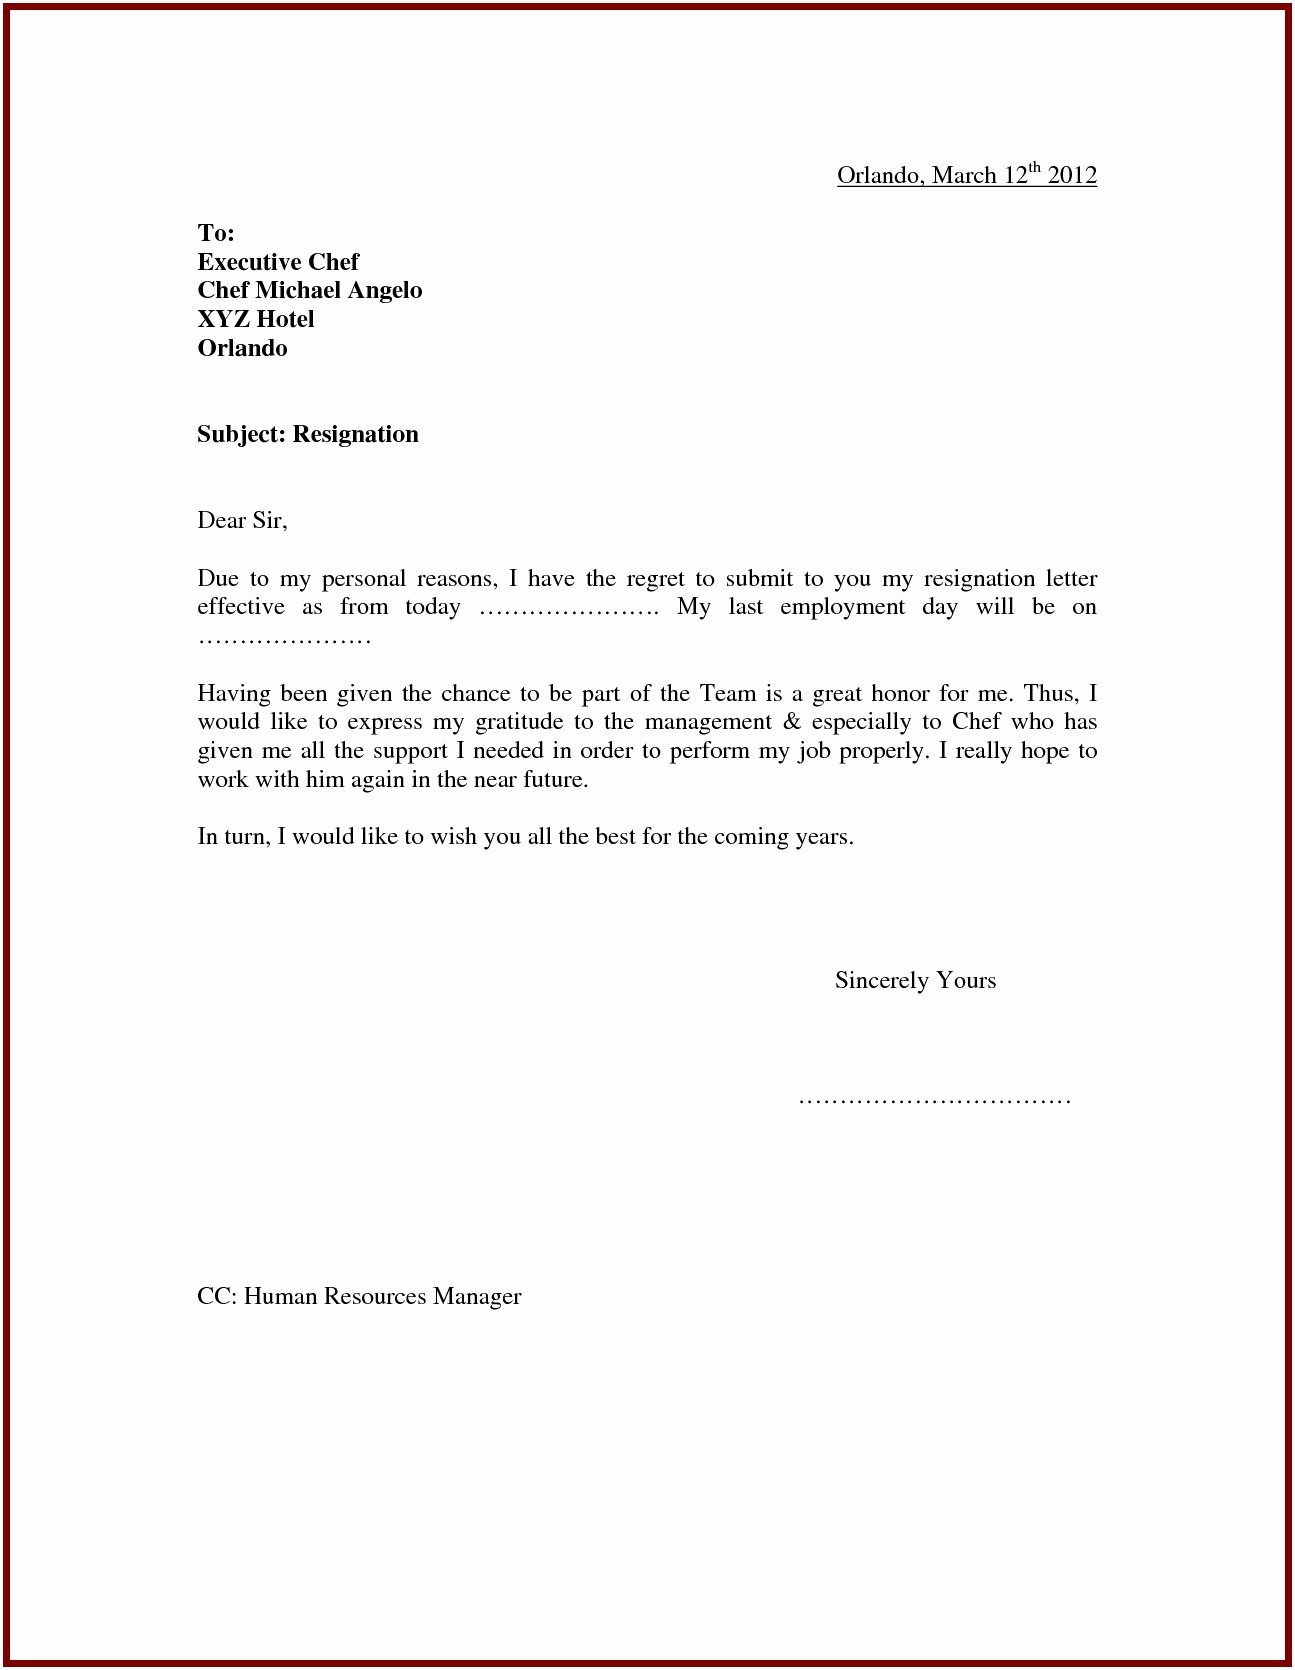 Relocation Agreement Letter Lovely 26 Resignation Letters Simple Relocation Repayment